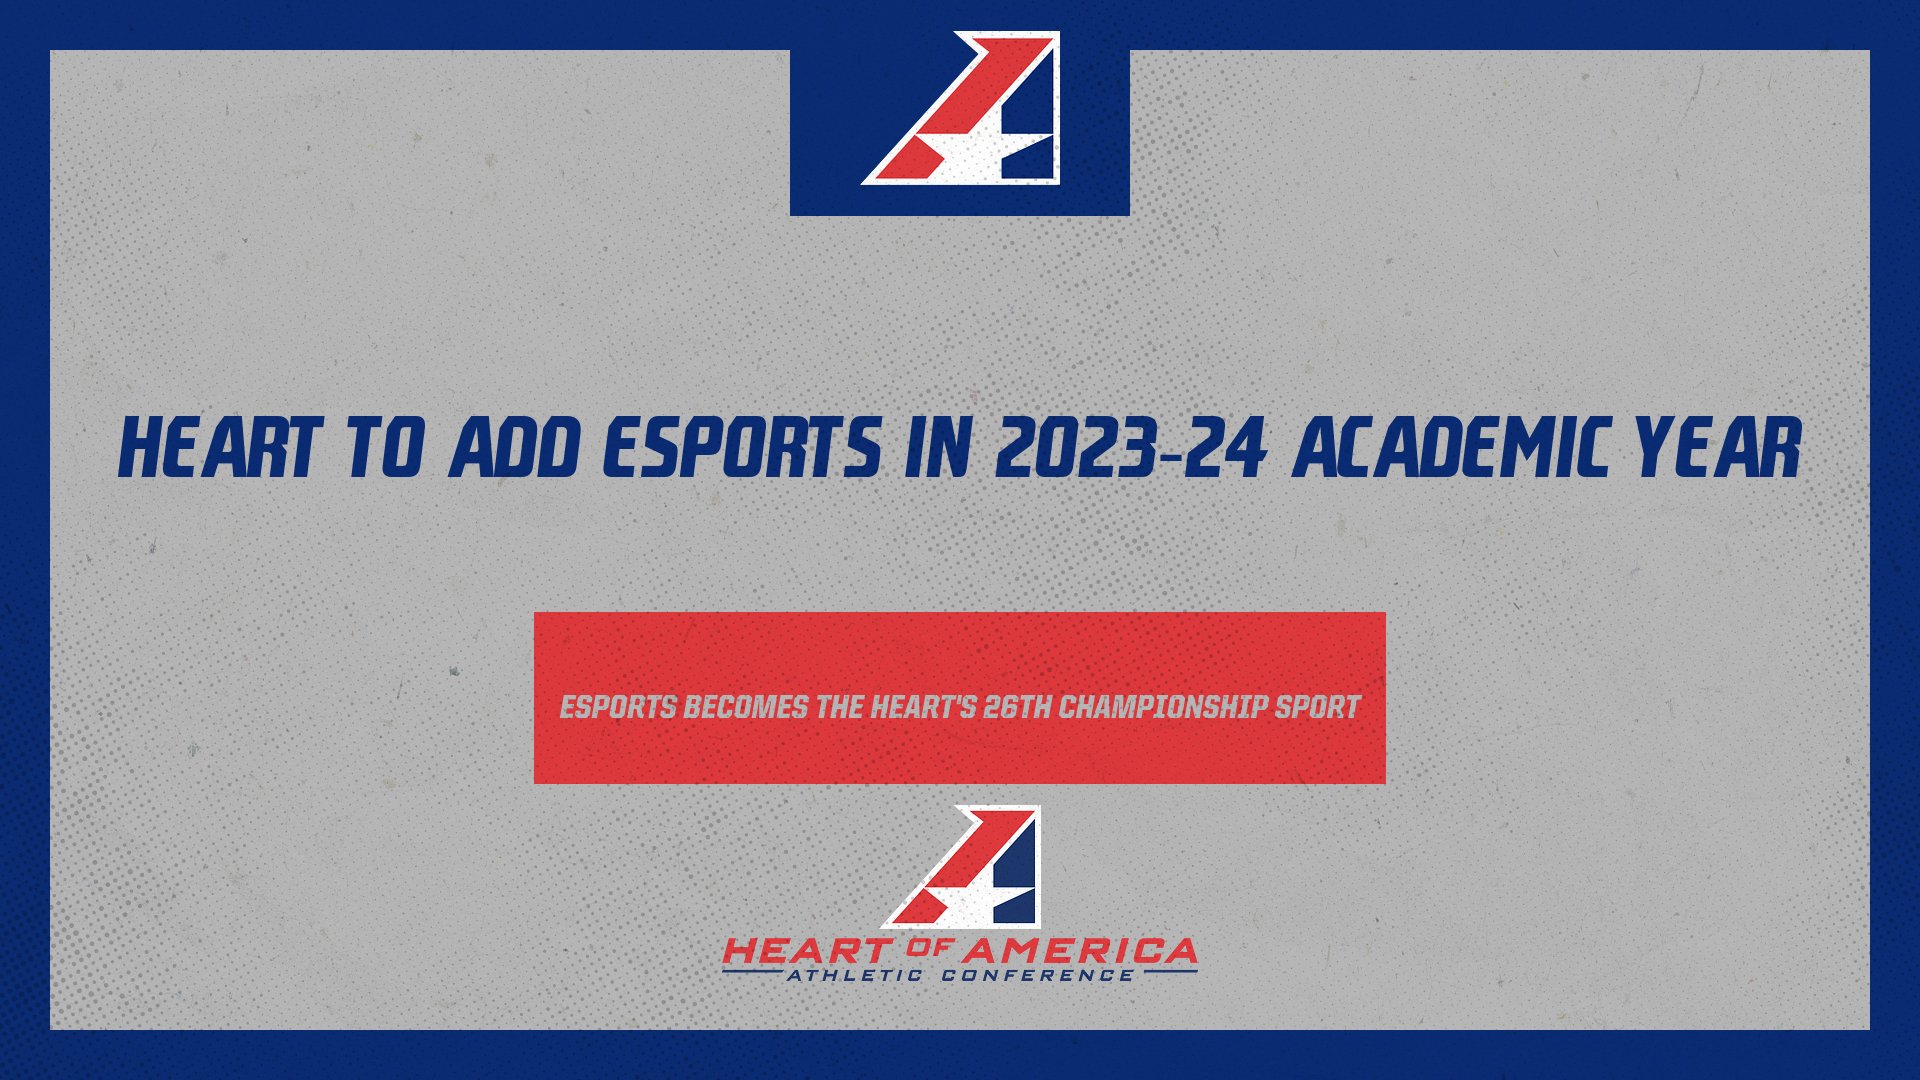 Heart of America Athletic Conference Announces Addition of Esports as a Conference Championship Sport in 2023-24